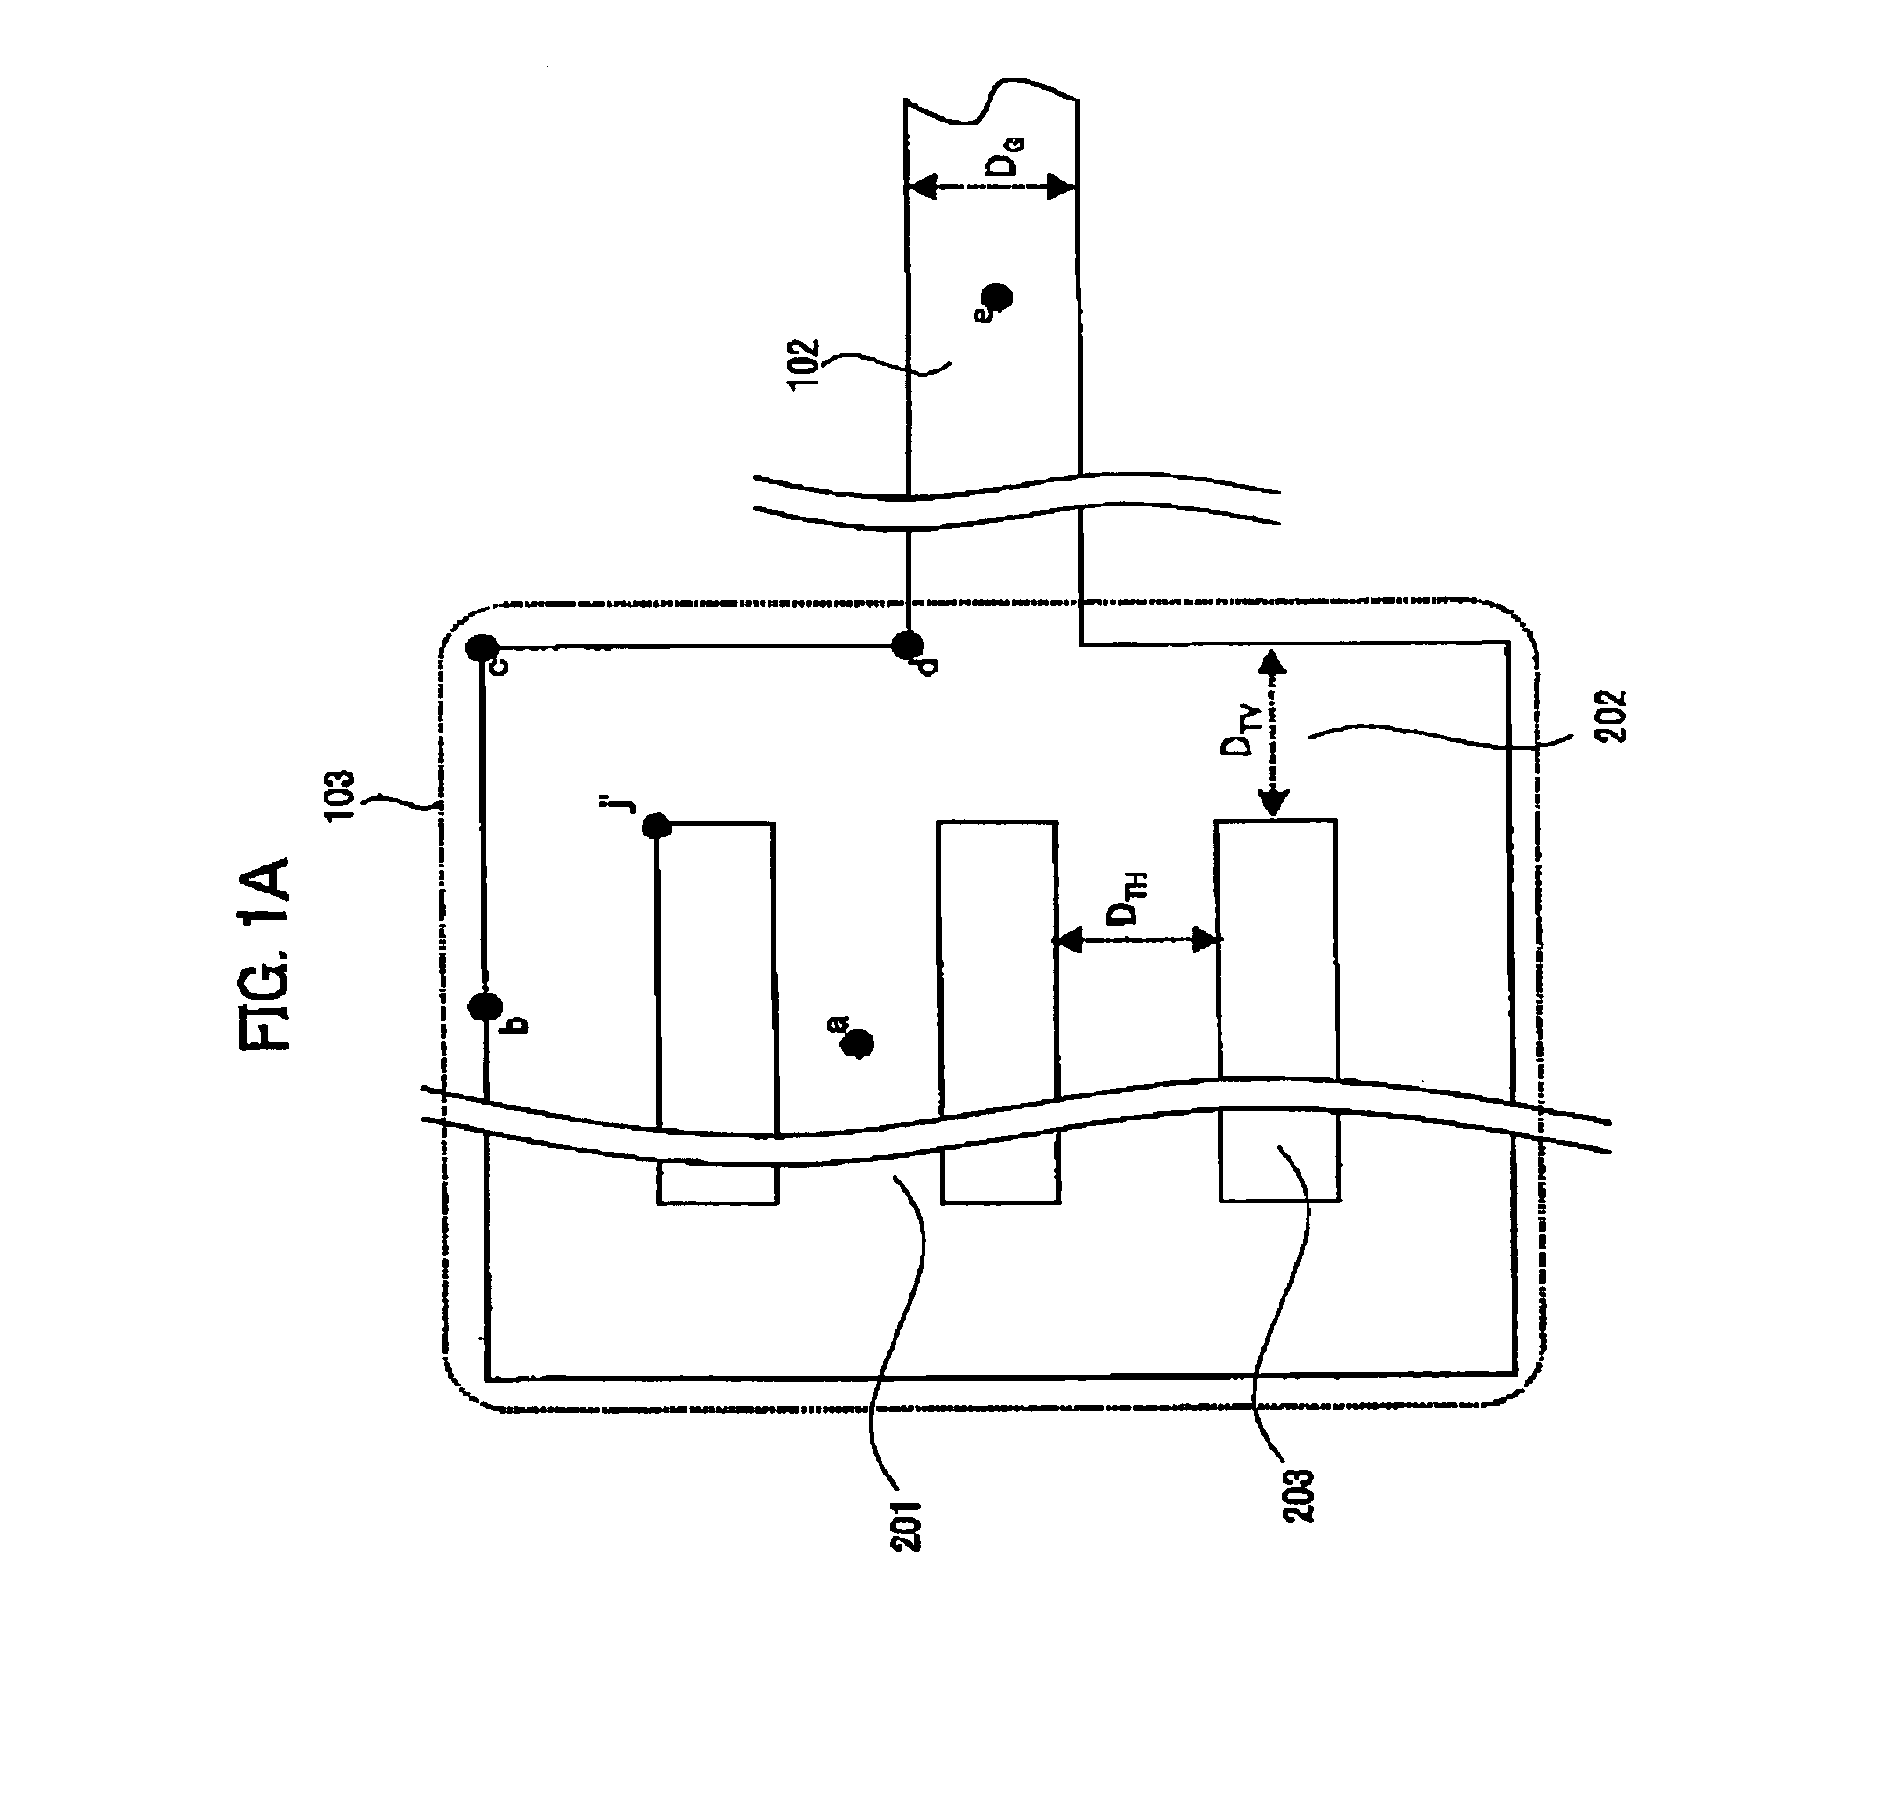 Substrate with plane patterns and display device using the same